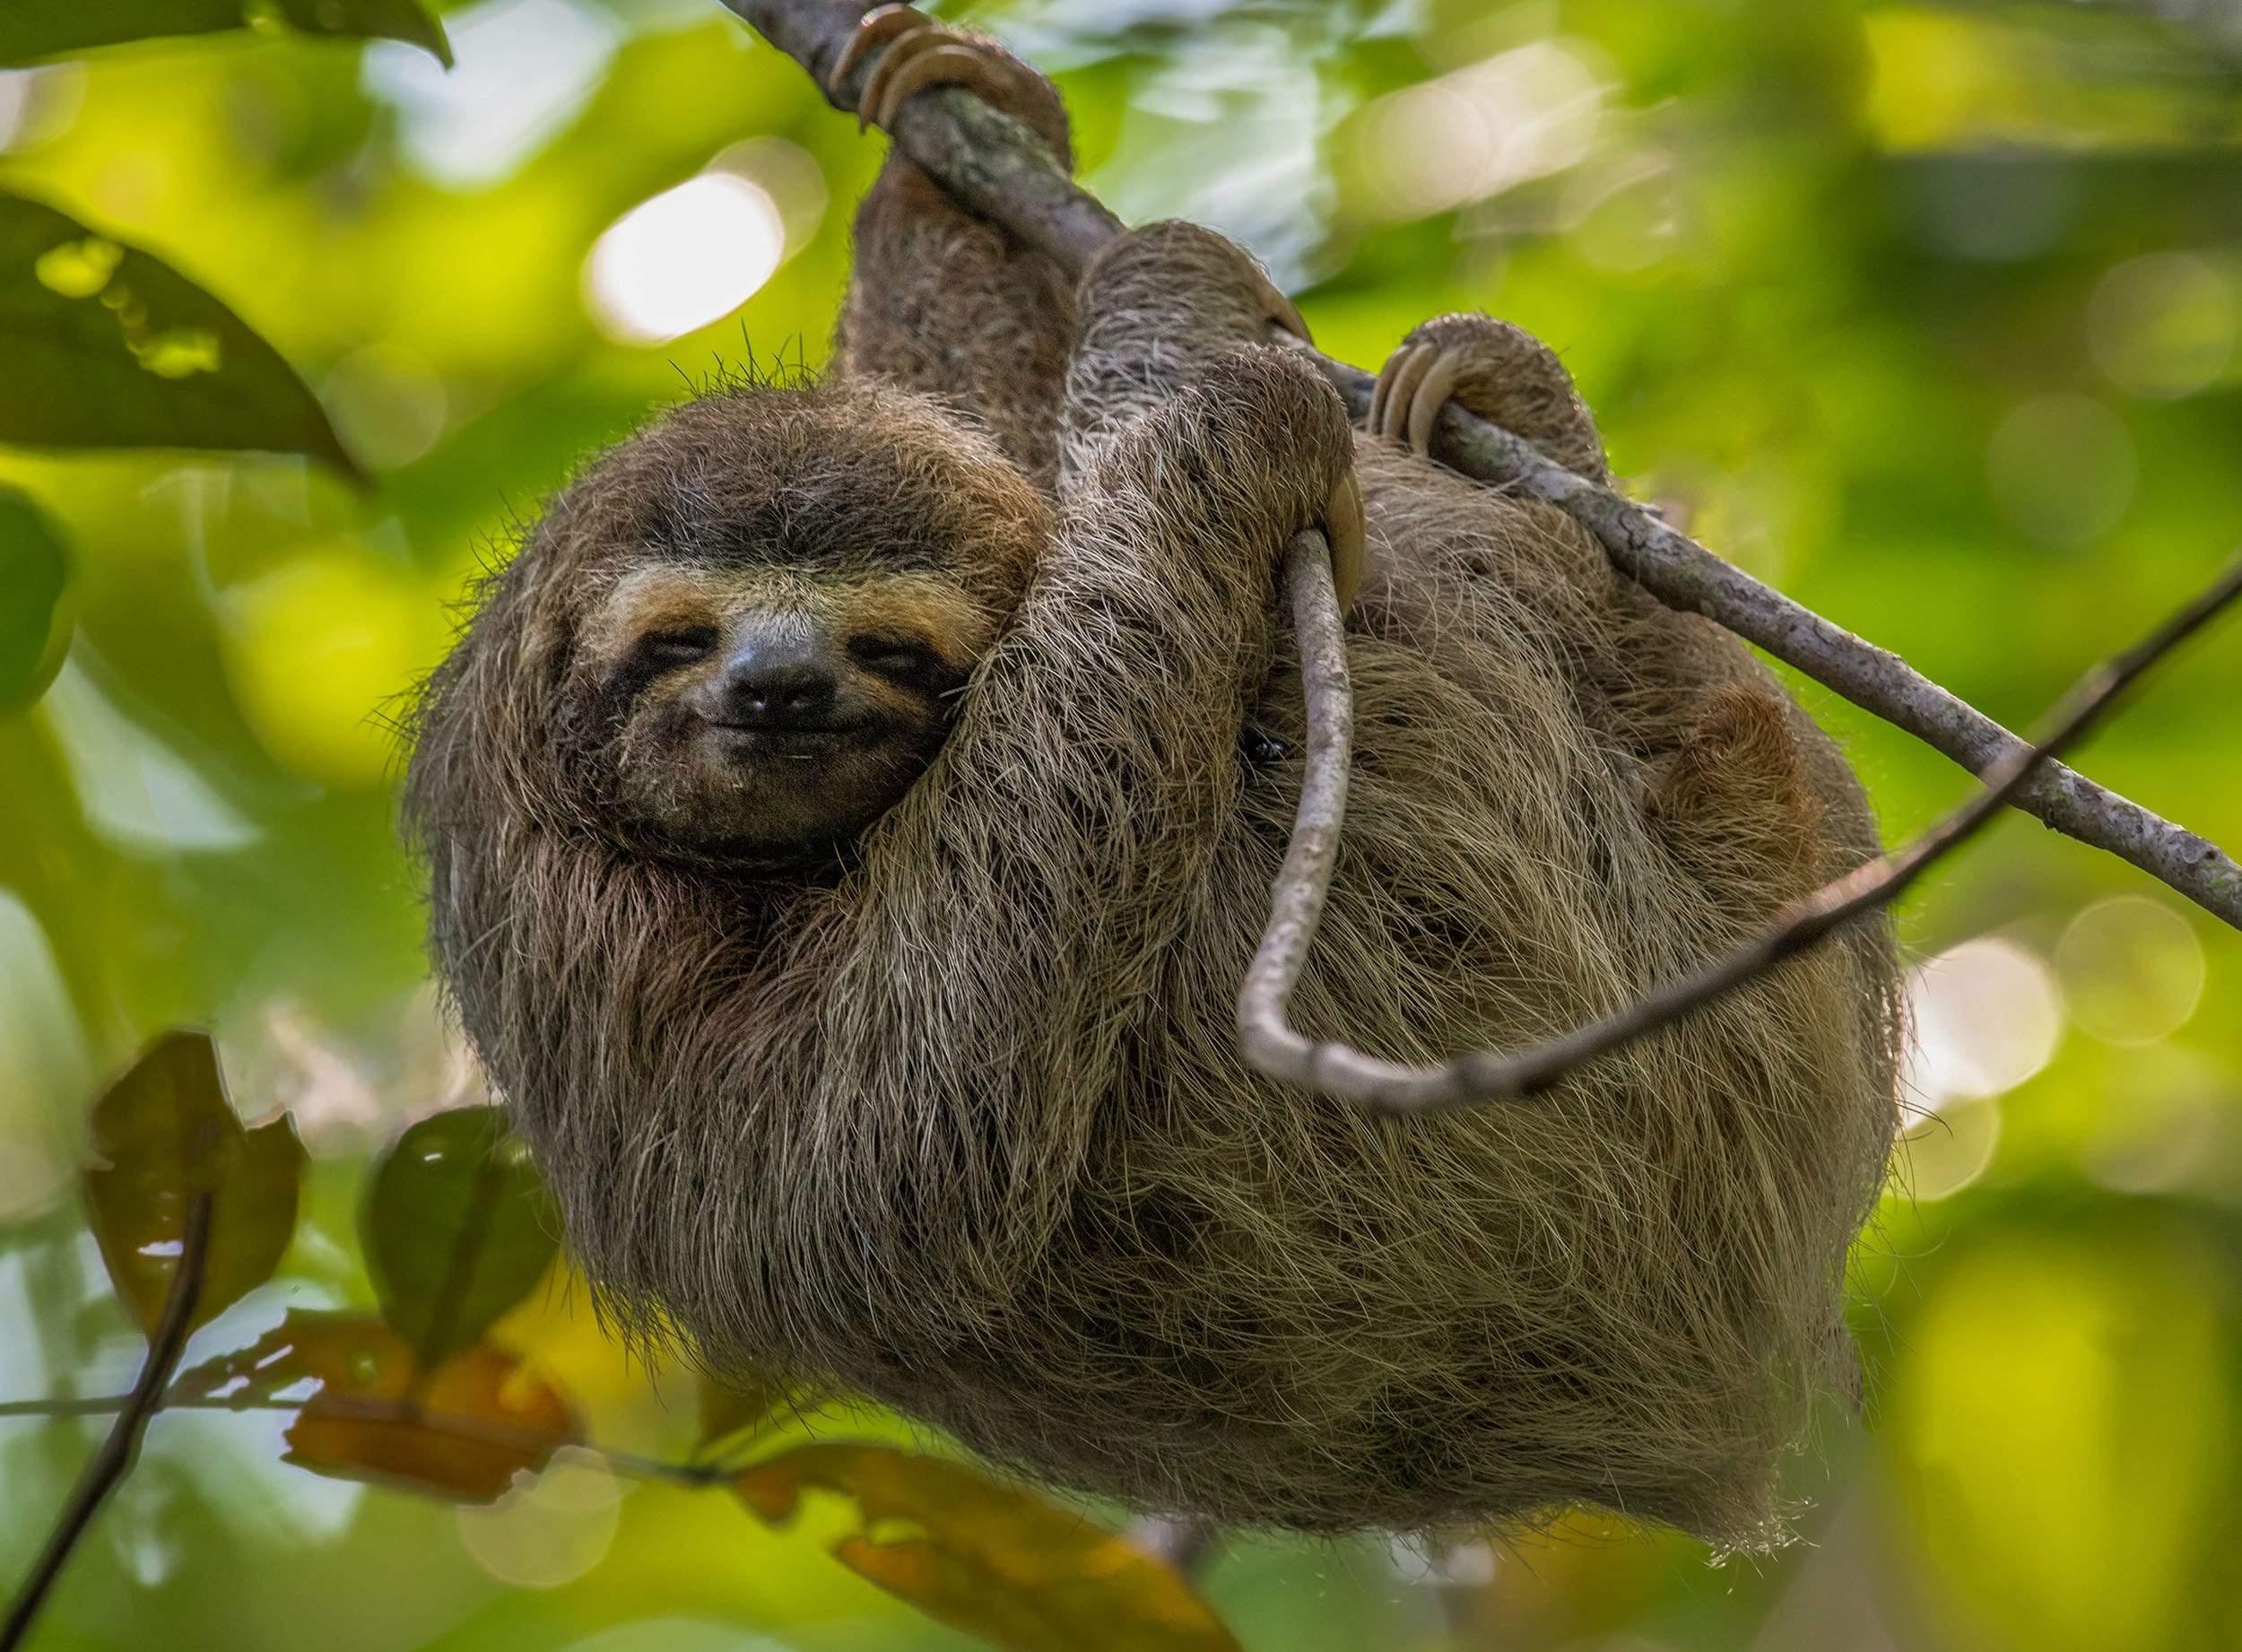 Sloth hanging in tree with green background